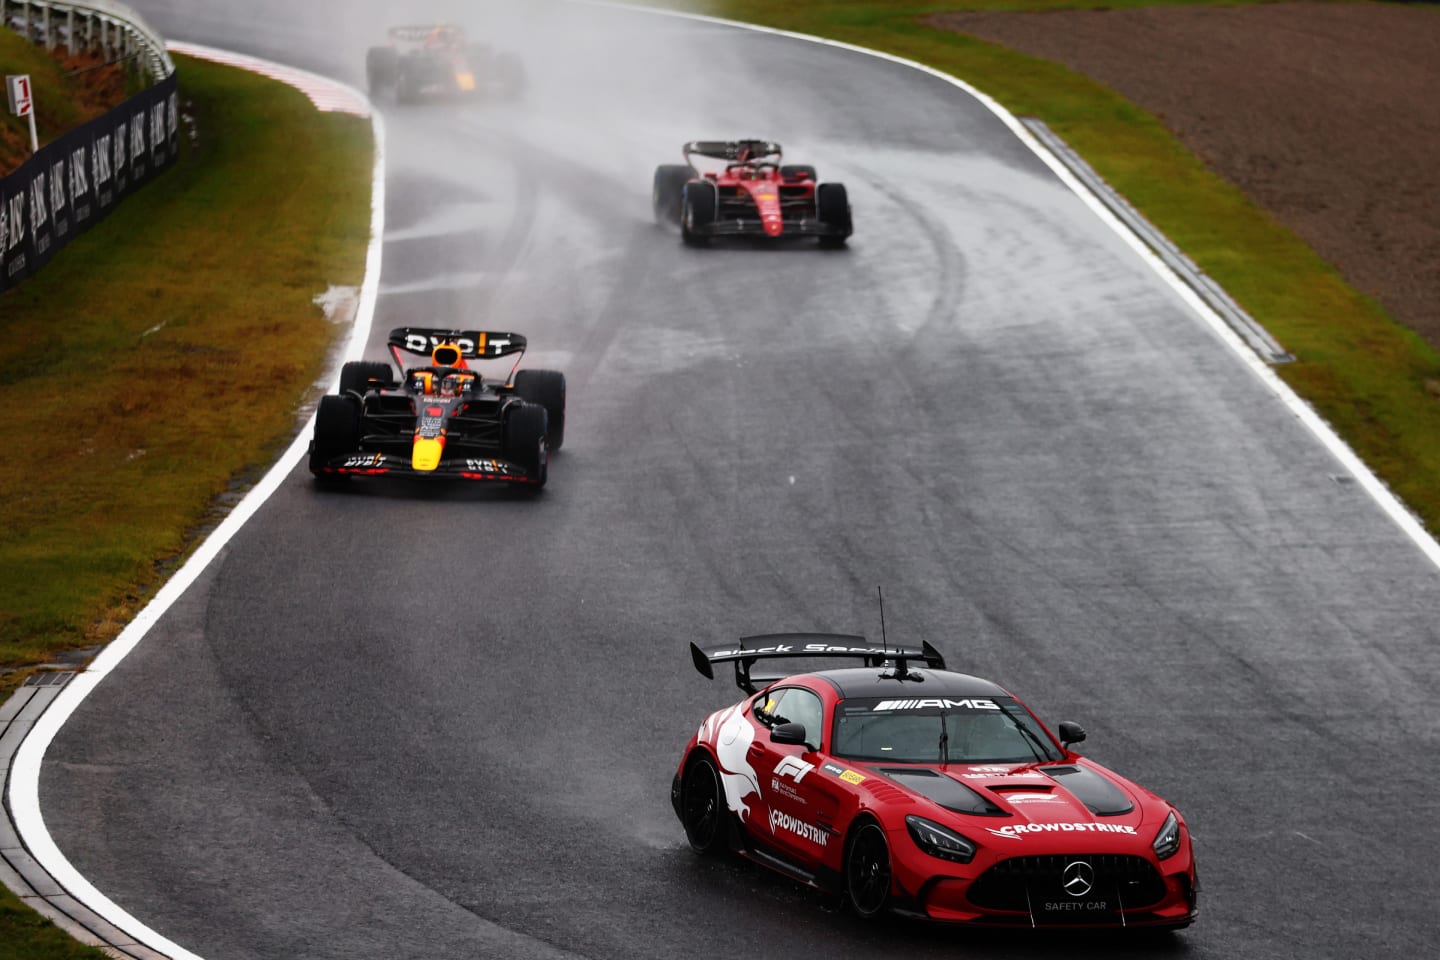 SUZUKA, JAPAN - OCTOBER 09: The FIA Safety Car leads the field at the restart after a red flag